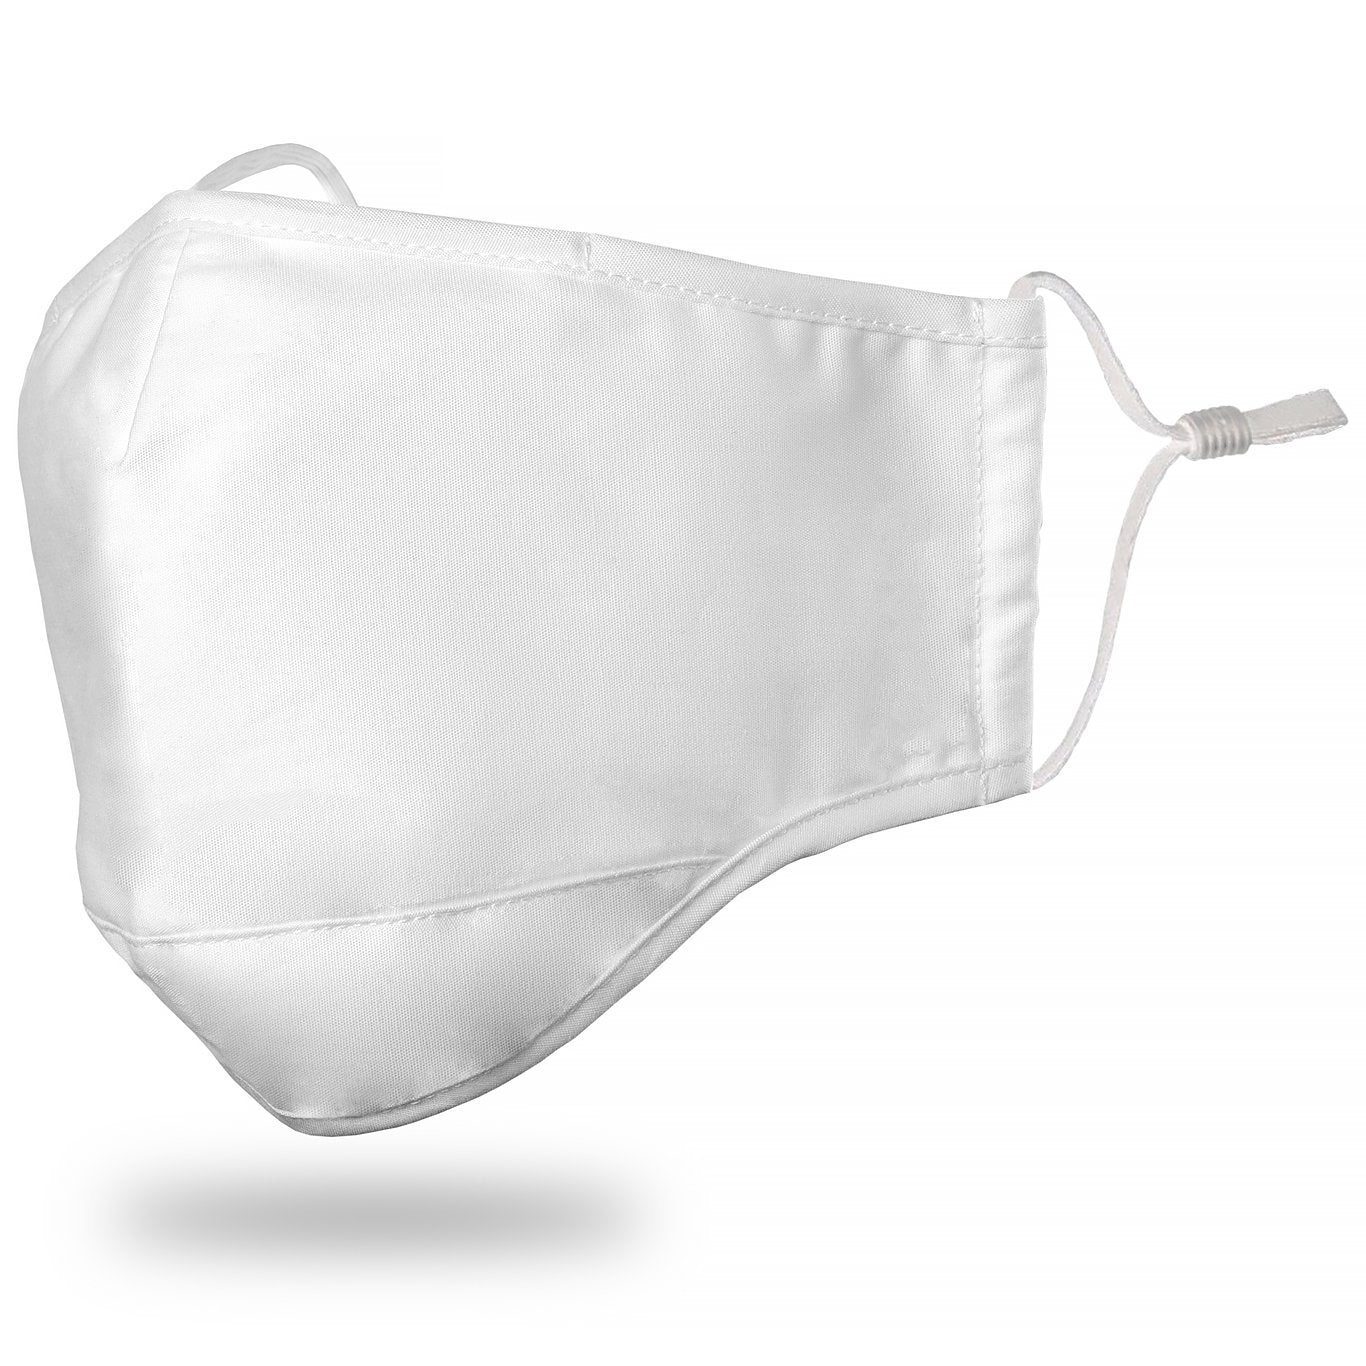 Face Mask Adult - Solid White - Face Mask